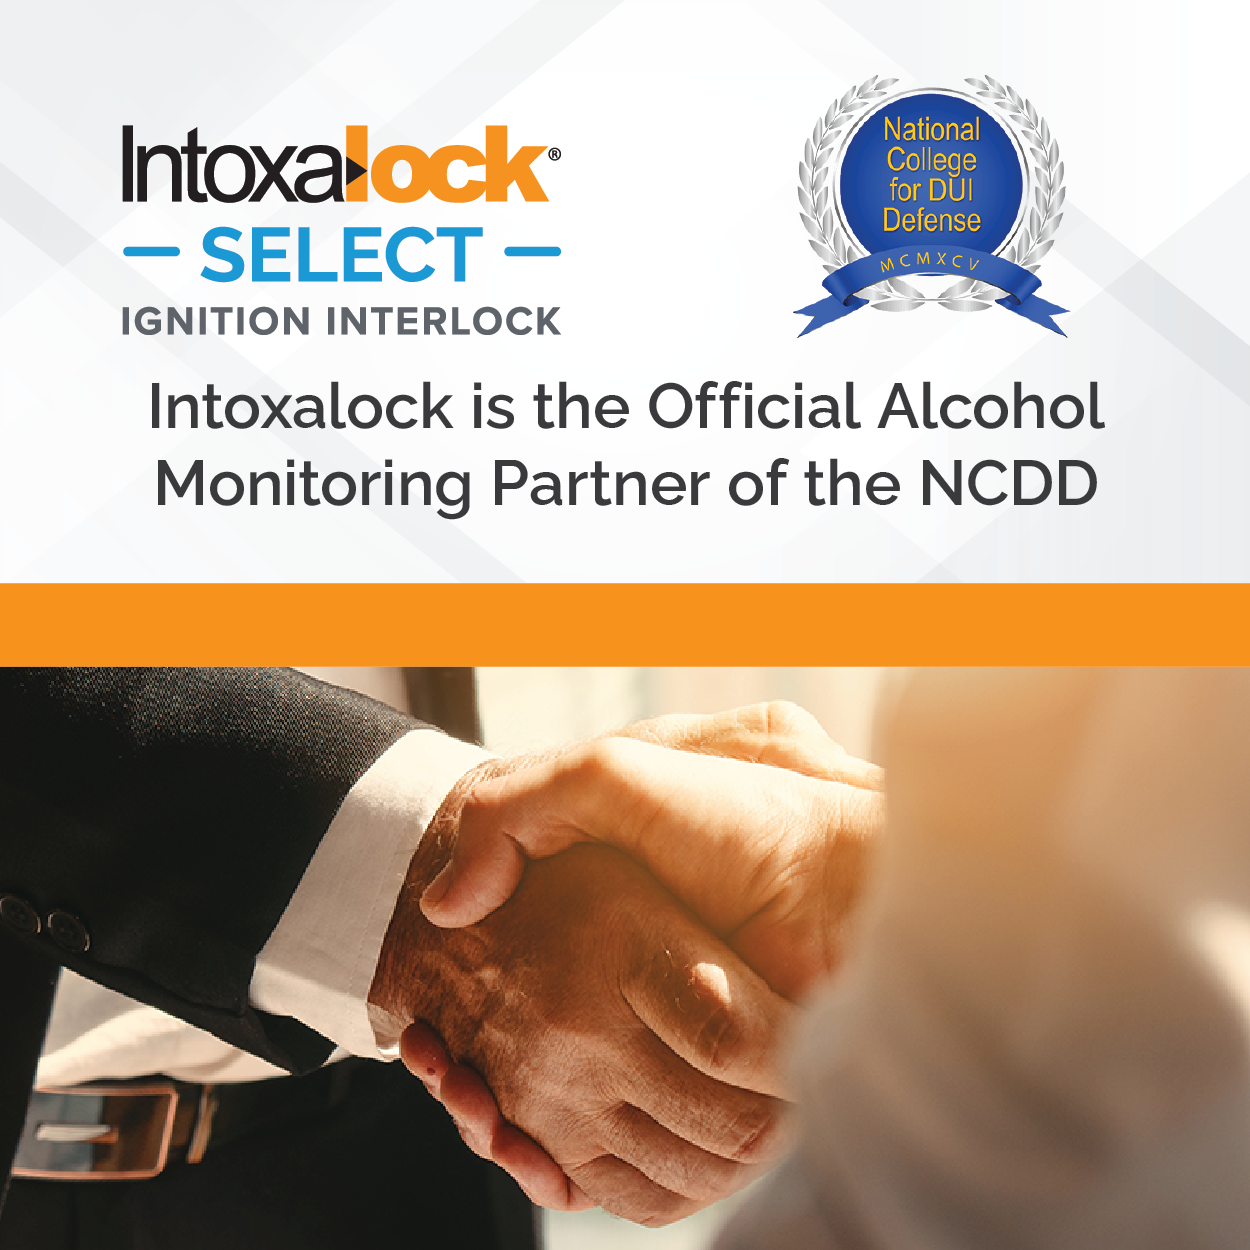 Intoxalock Named Official Alcohol Monitoring Partner of the National College for DUI Defense